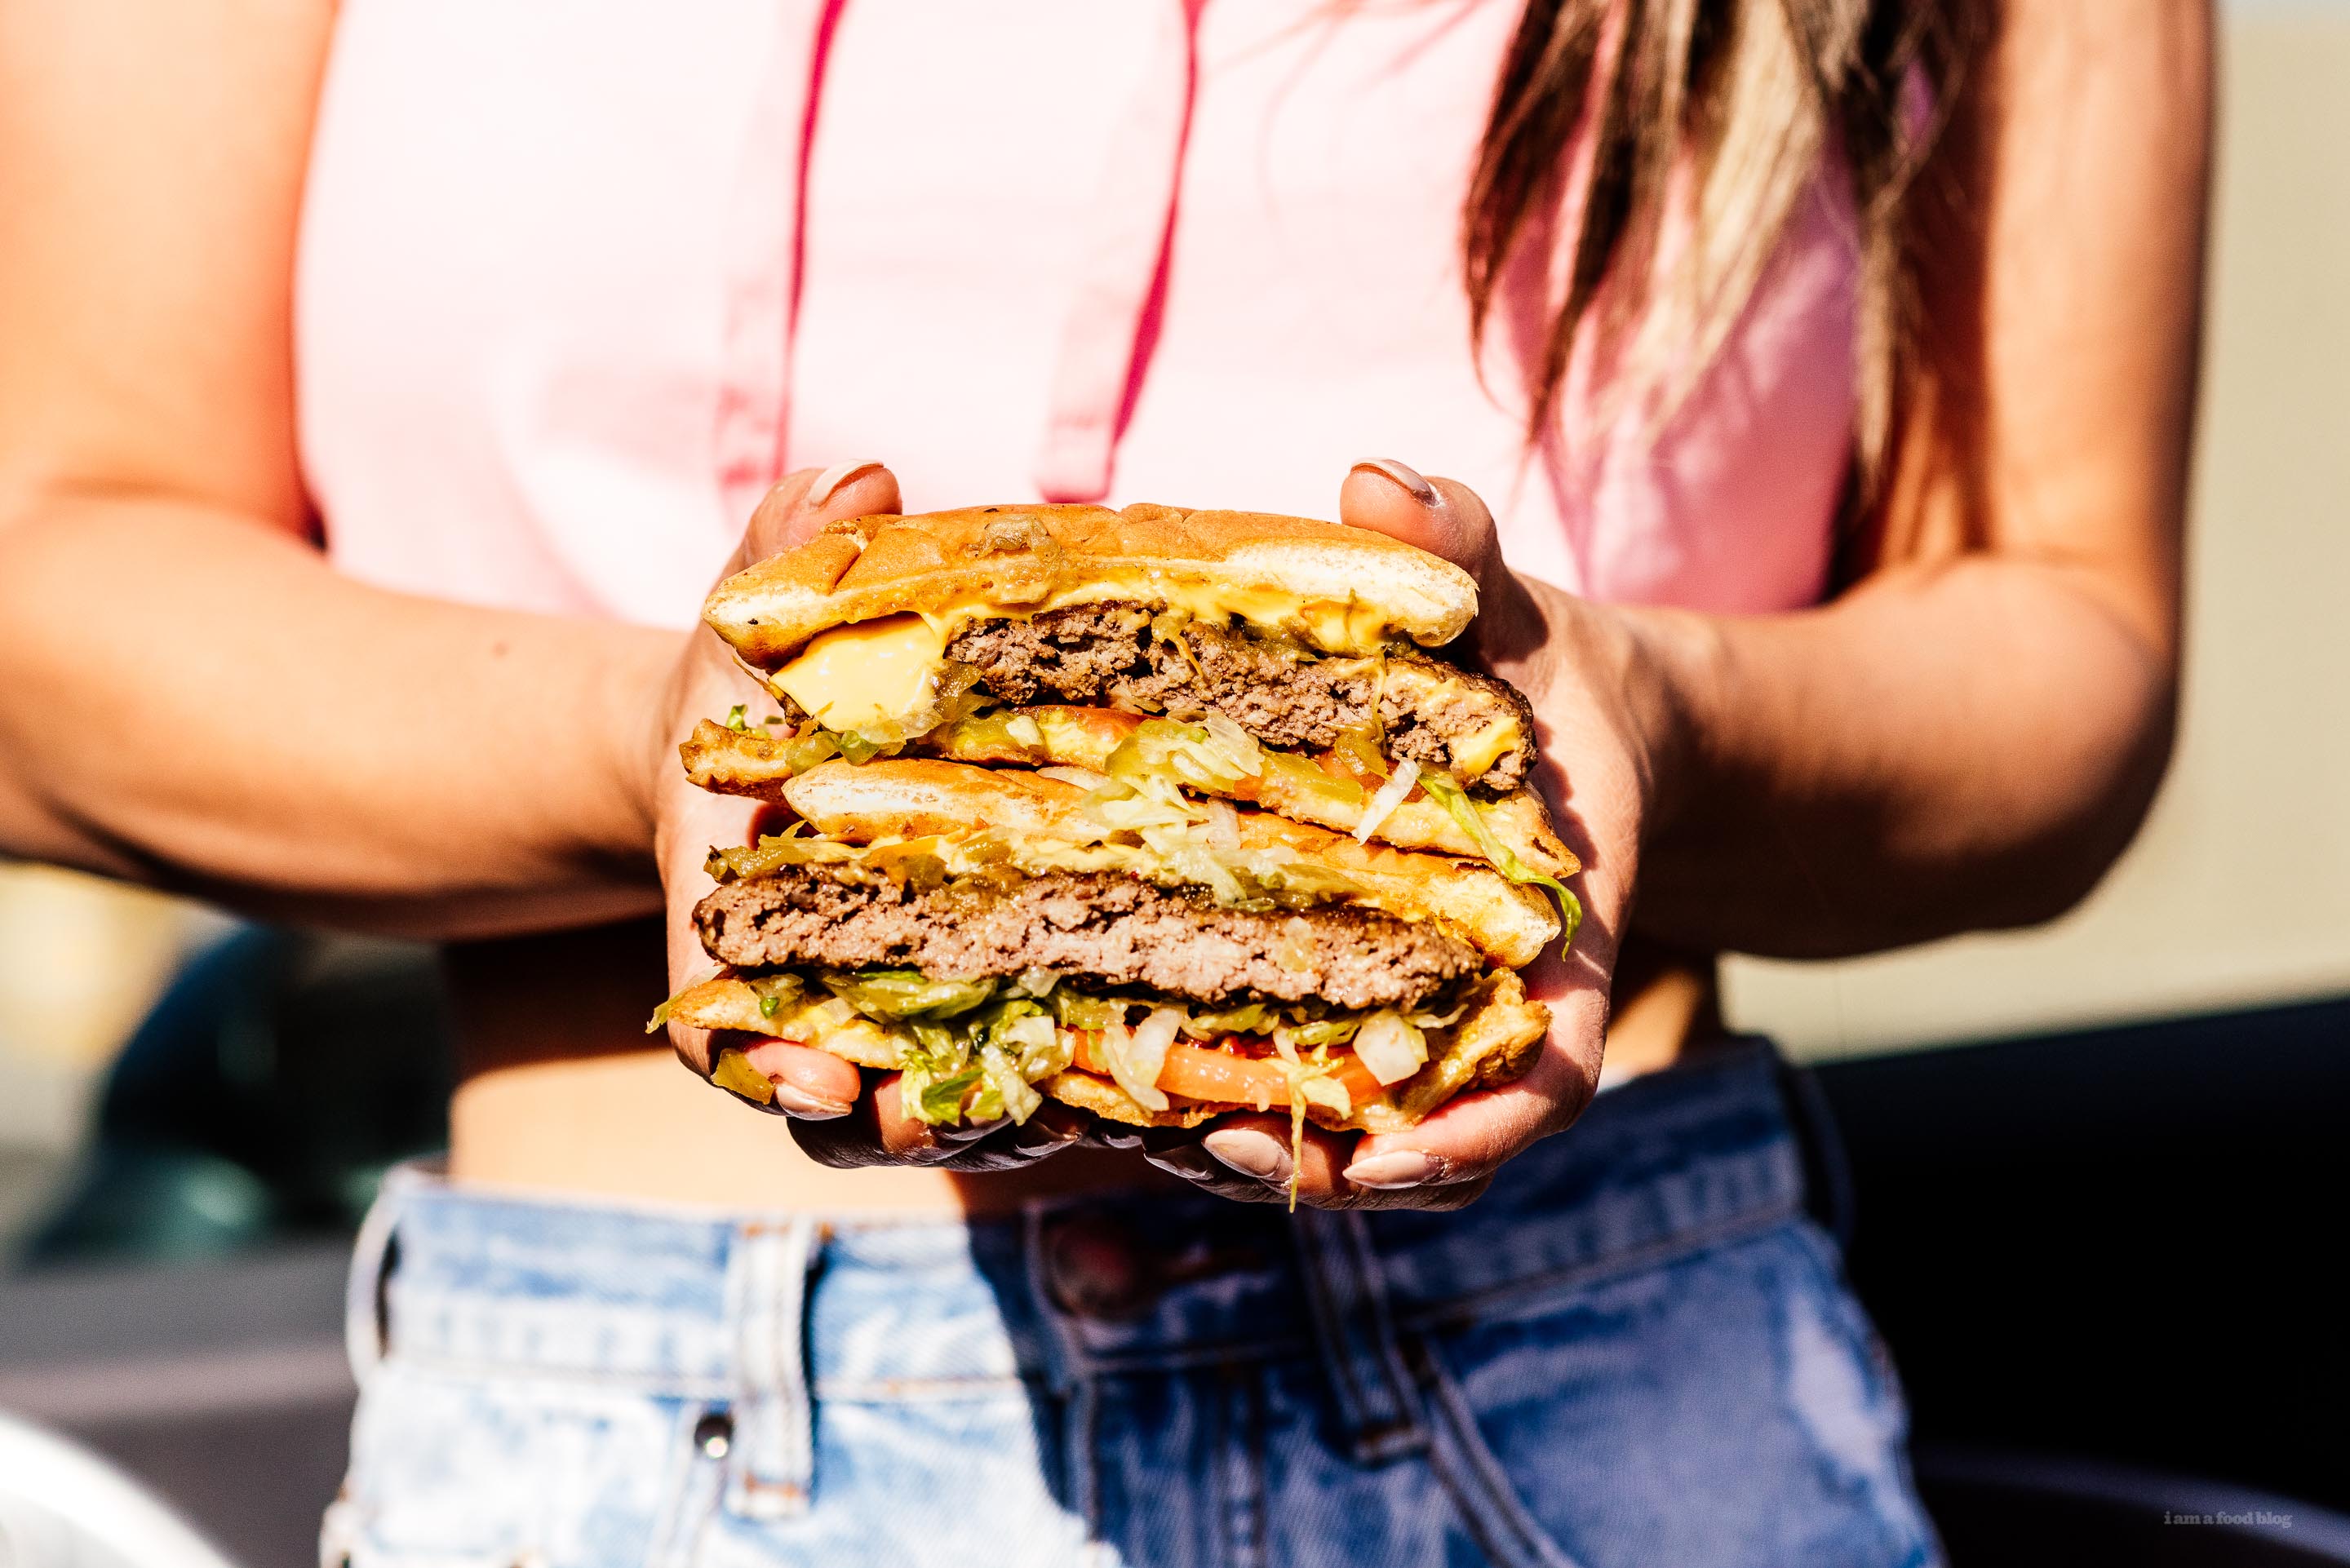 Our Search for the Best Green Chile Cheeseburger in New Mexico